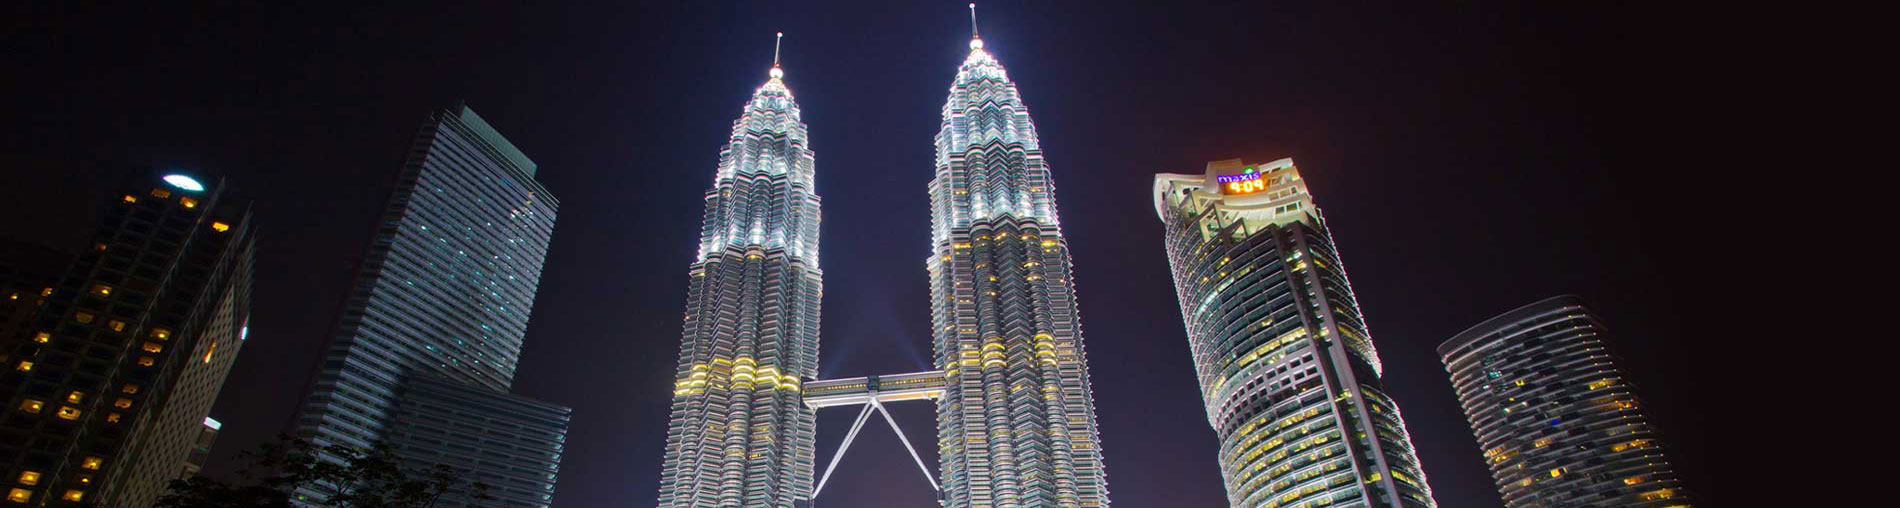 Malaysia Holiday Package - 6 Nights